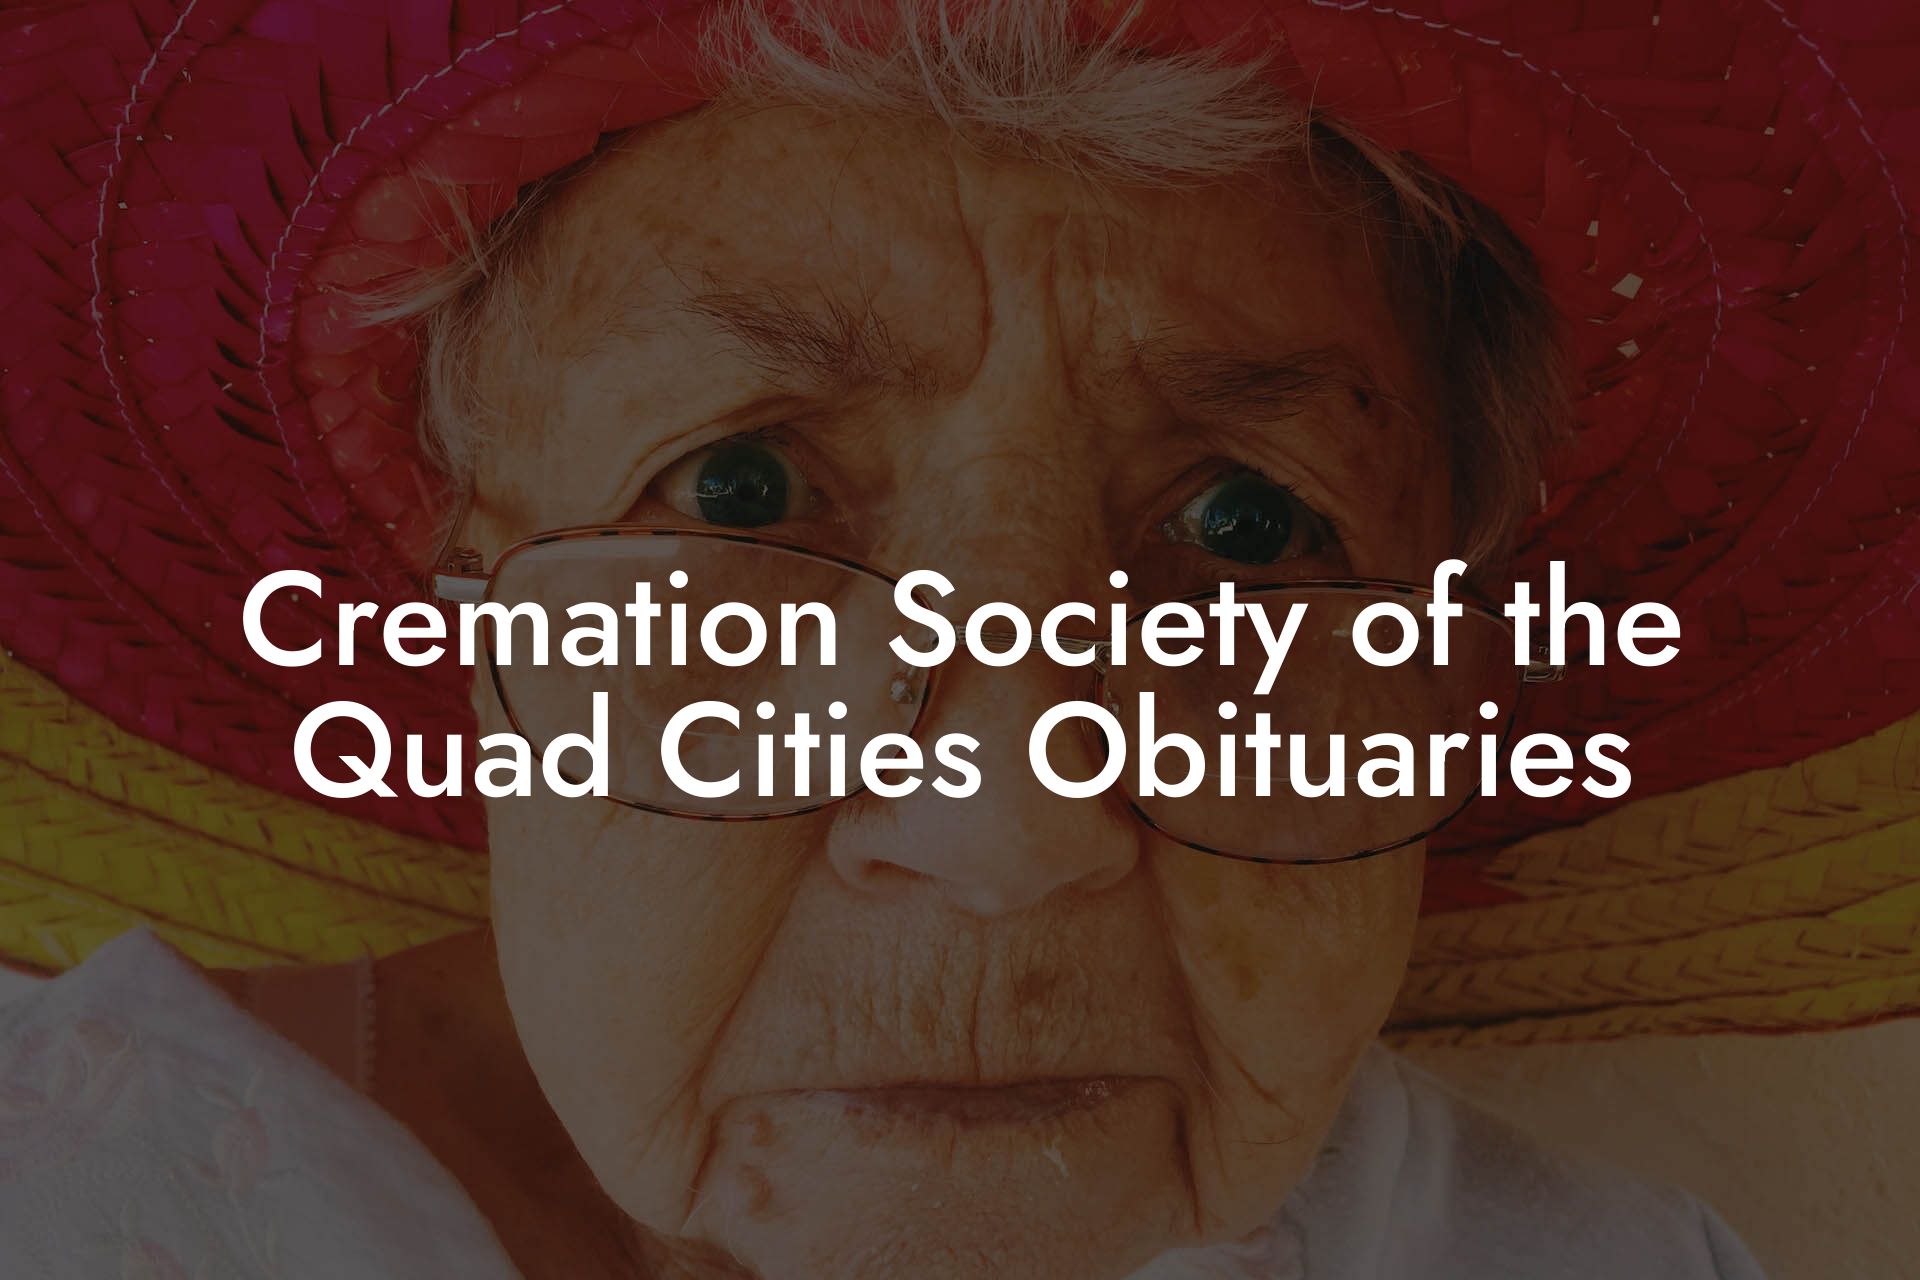 Cremation Society of the Quad Cities Obituaries